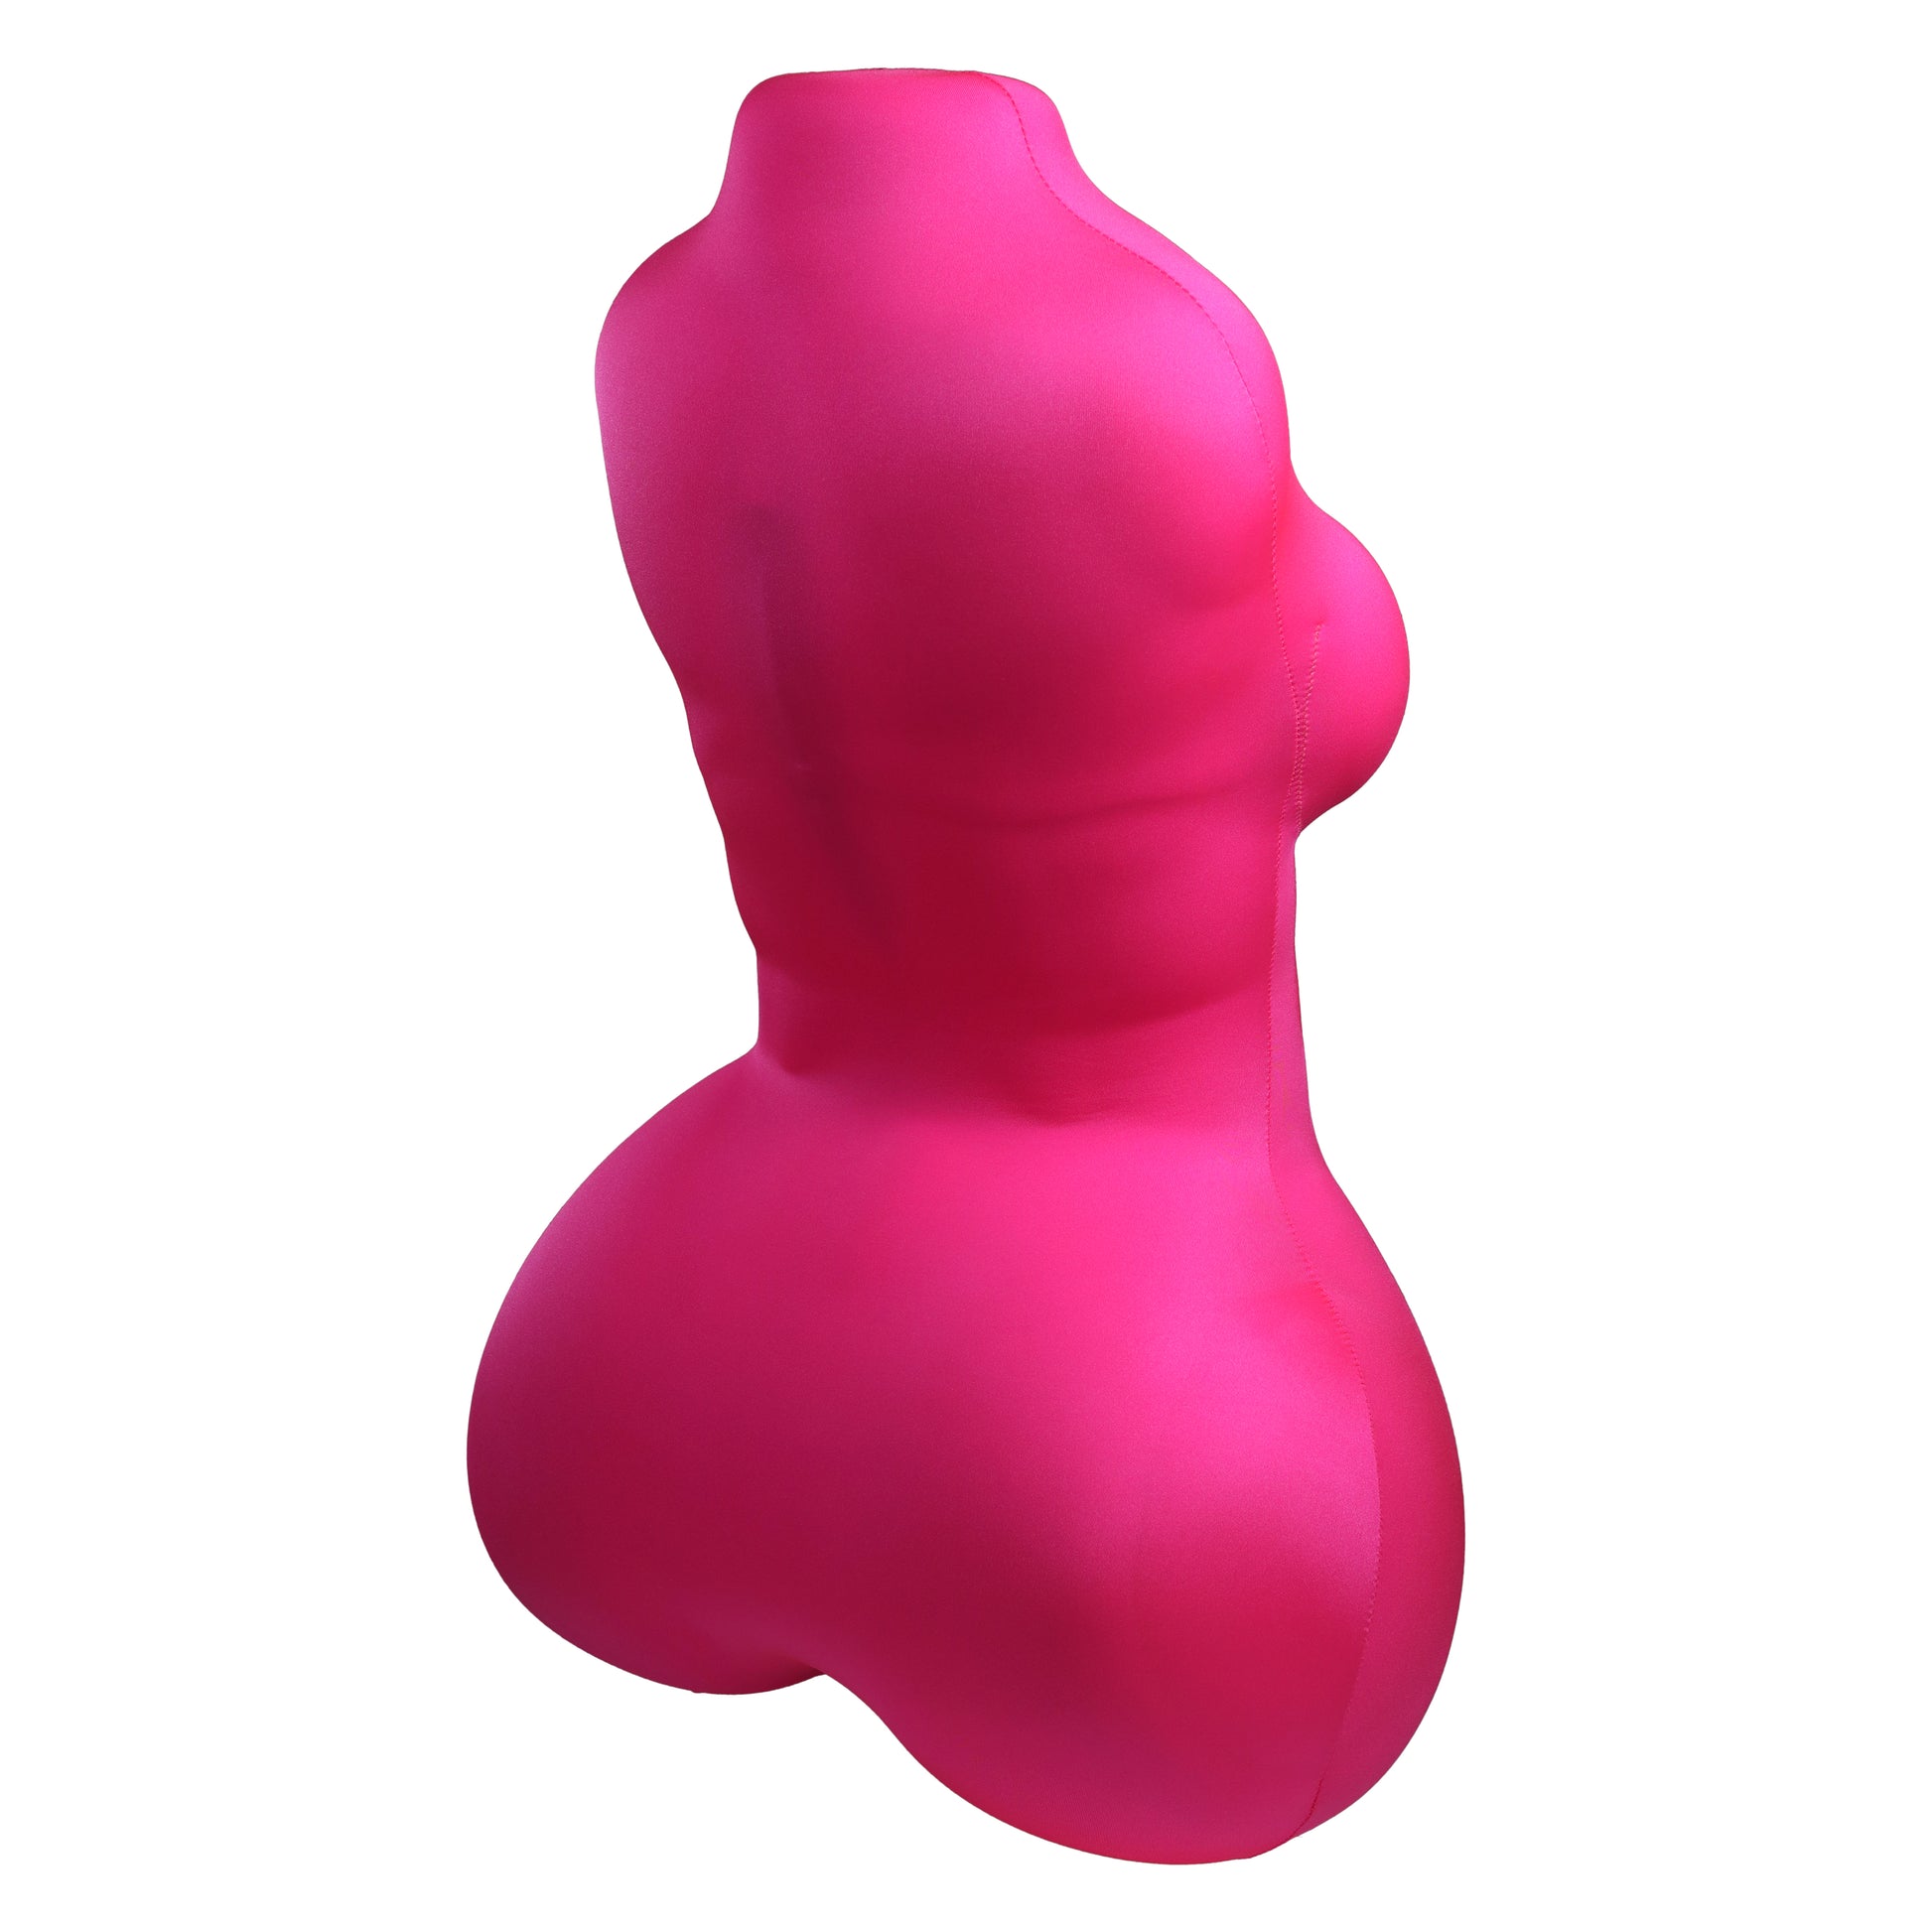 Made from high-quality materials, the Nookie Doll sex toy mount offers a firm yet supple surface that allows for optimal positioning and control. Using a Fleshlight mount can offer several benefits that can enhance the experience of using a Fleshlight, including hands-free use, improved stability, enhanced pleasure, and versatility.